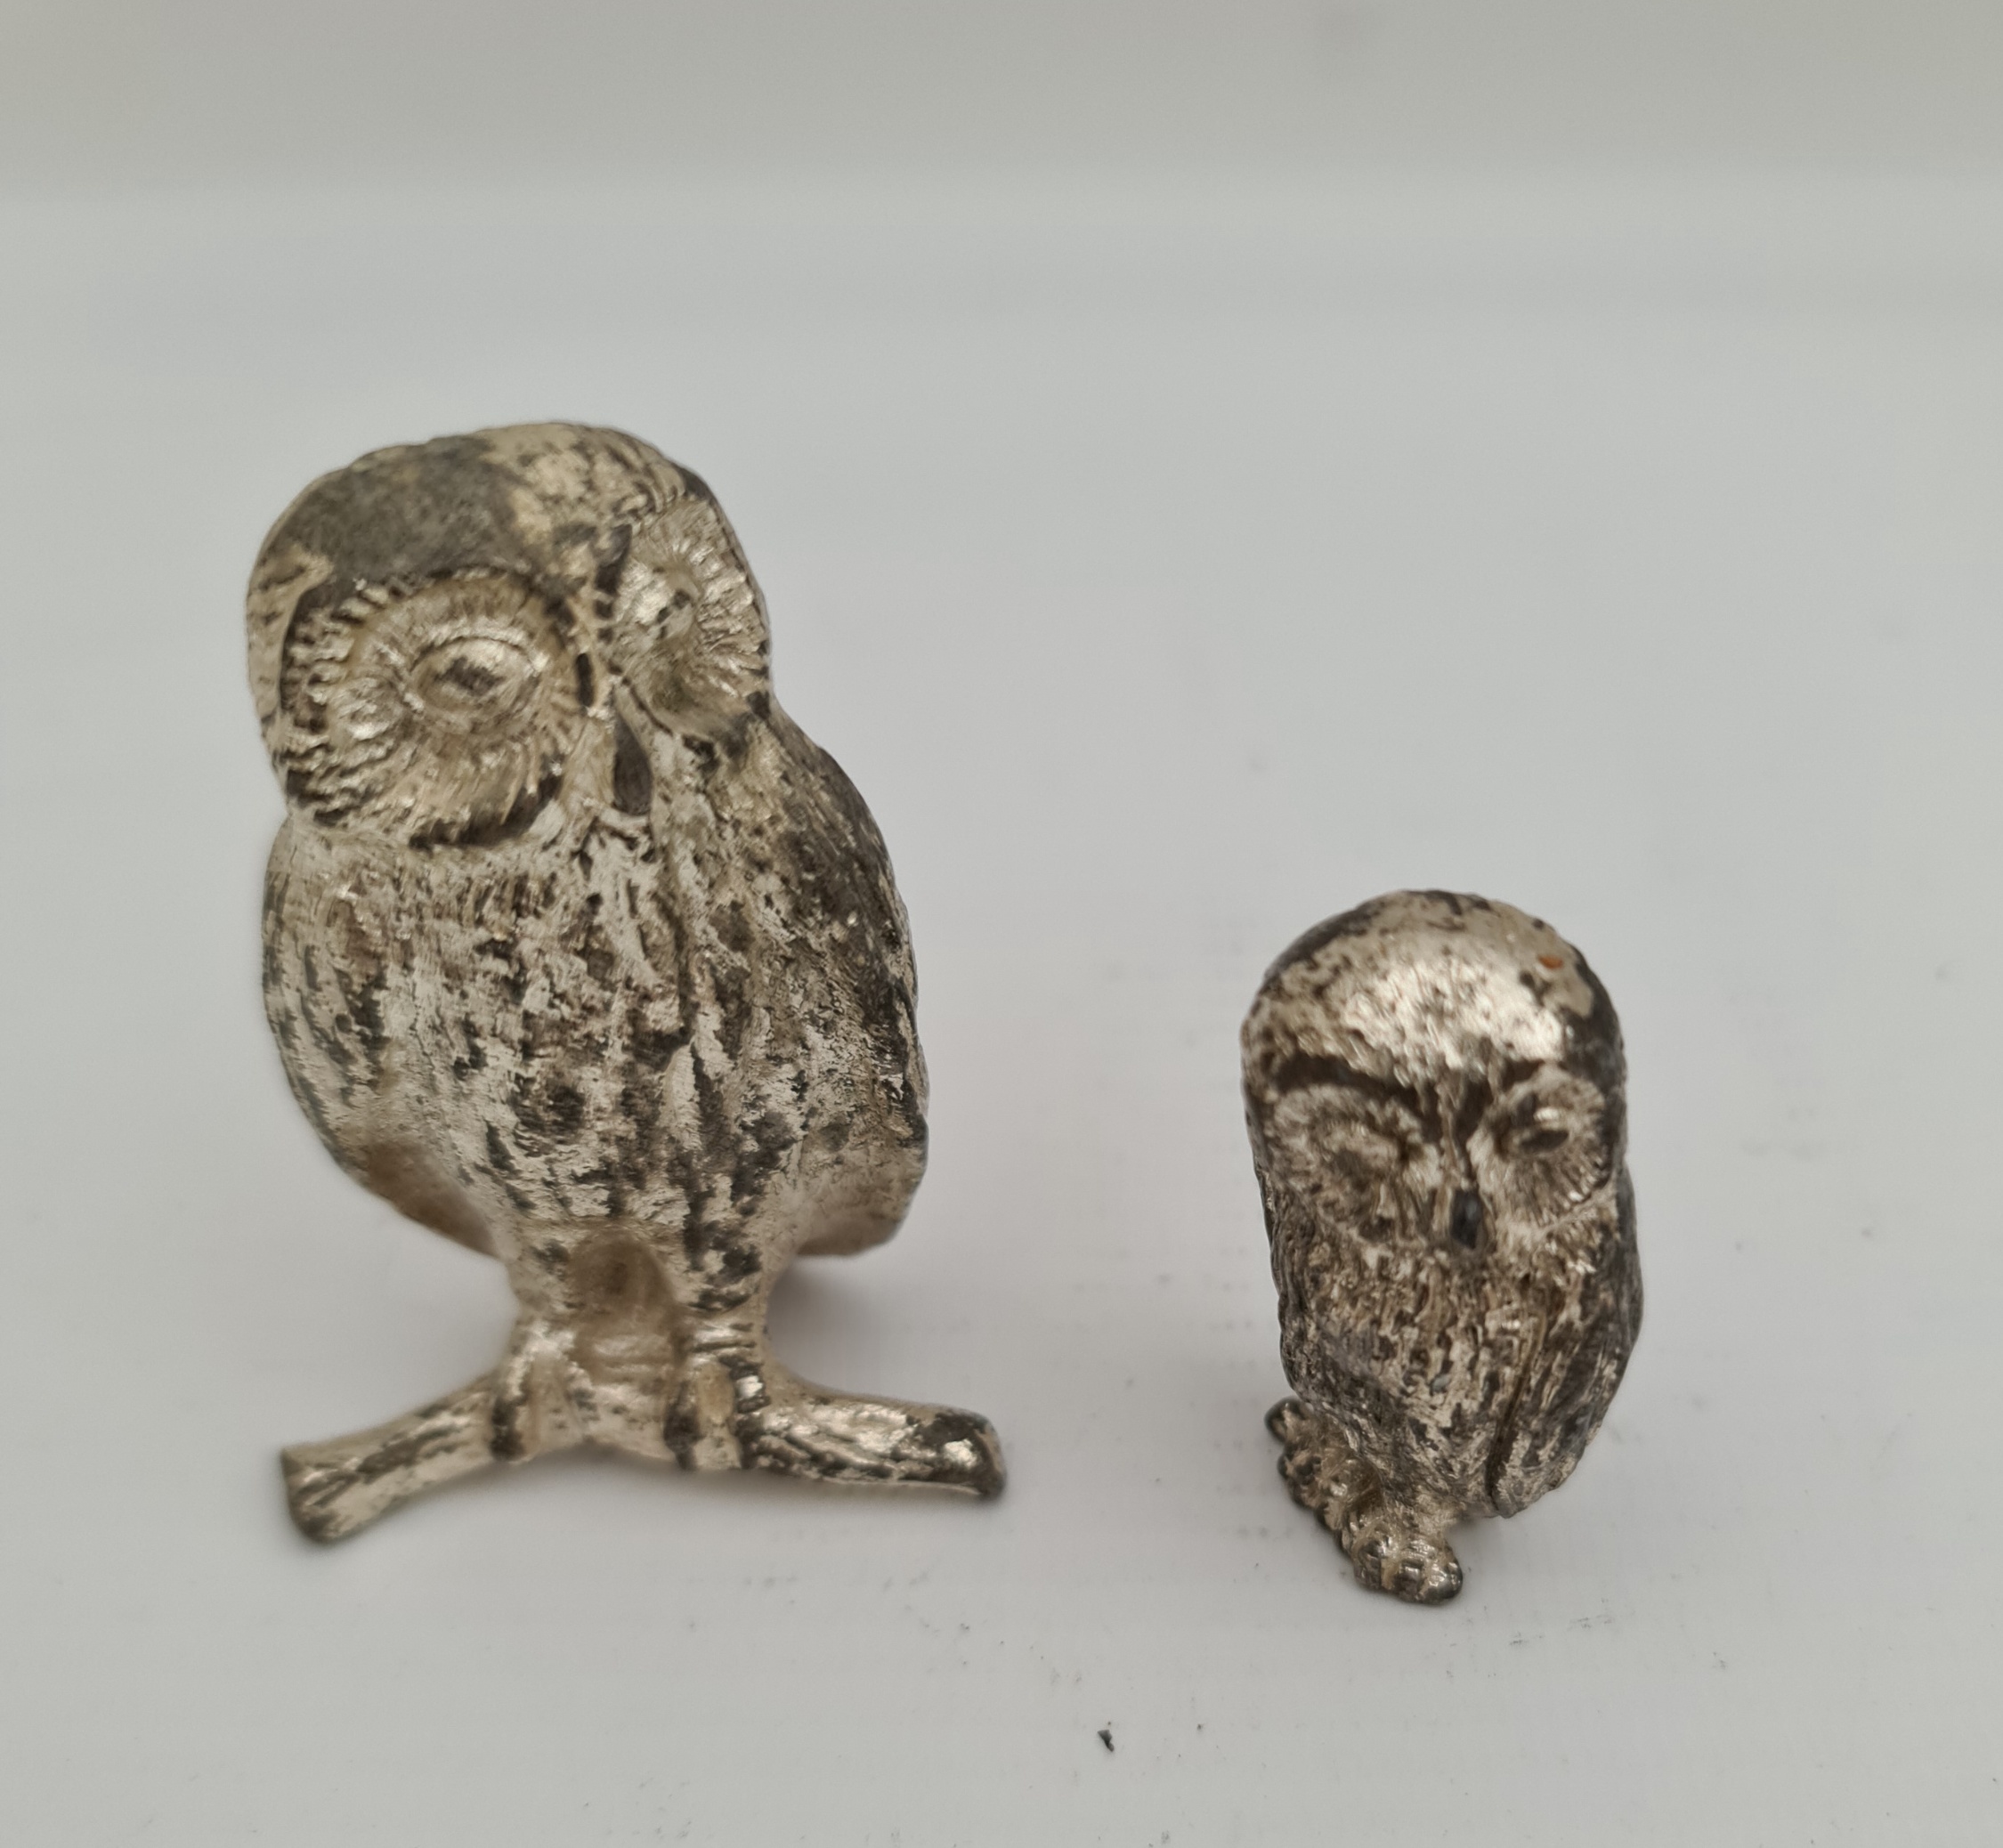 Vintage 2 x Cast Metal Owls Largest is 2.5 inches tall